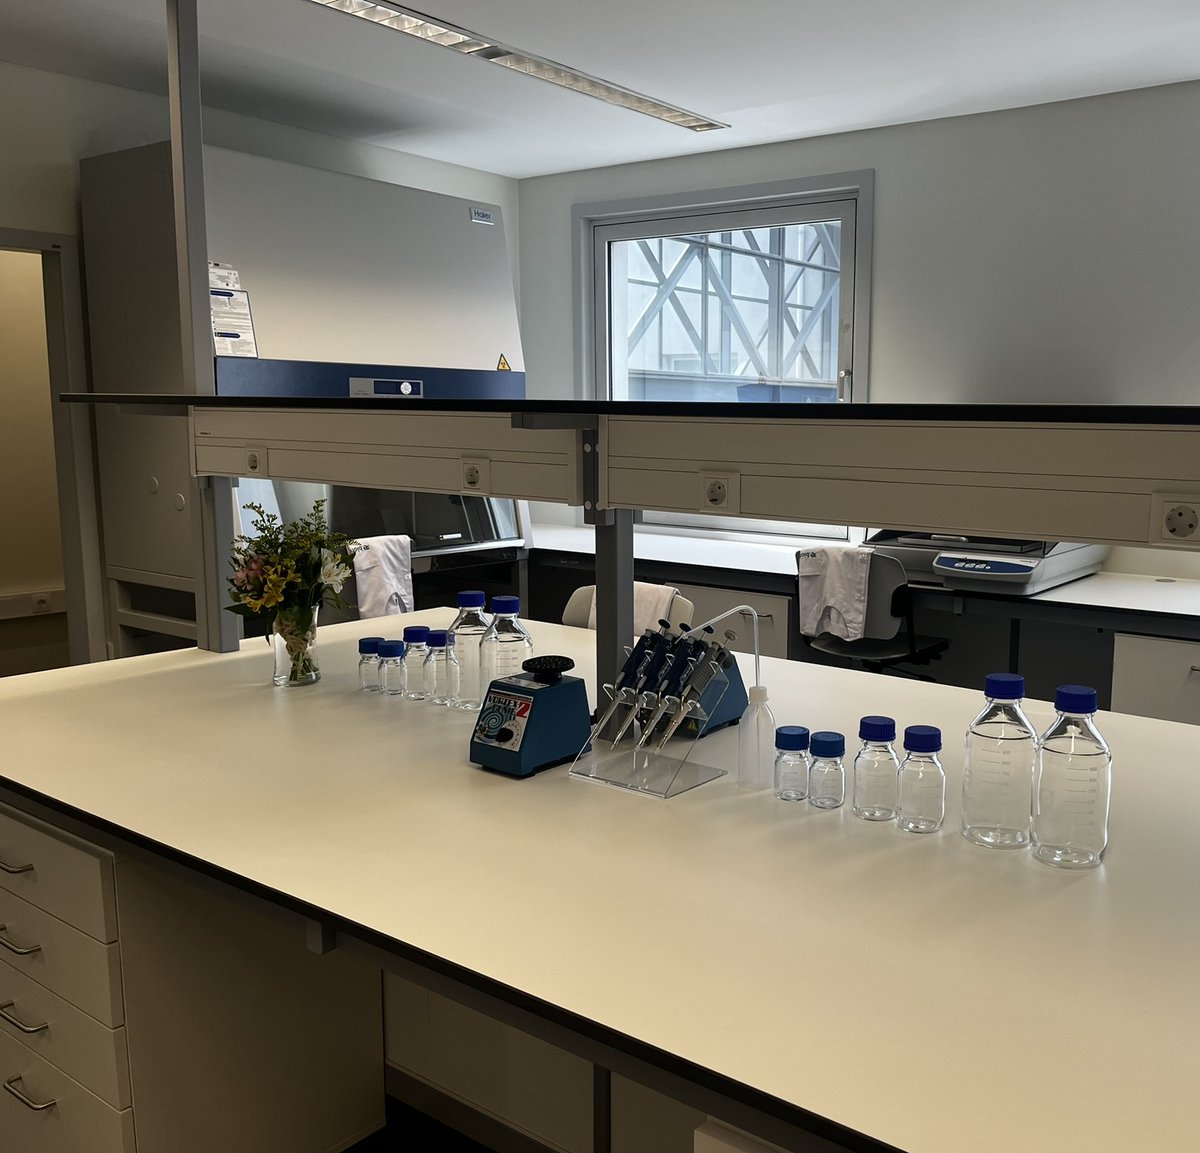 This is the 2nd  time I've been engaged in setting up a BSL2 laboratory from scratch  (the first time at Biomode, SA, and now at #FEUP,  for the #eBiofilm project). This team work  will help to promote the interaction between academic research and  industry on engineered biofilms